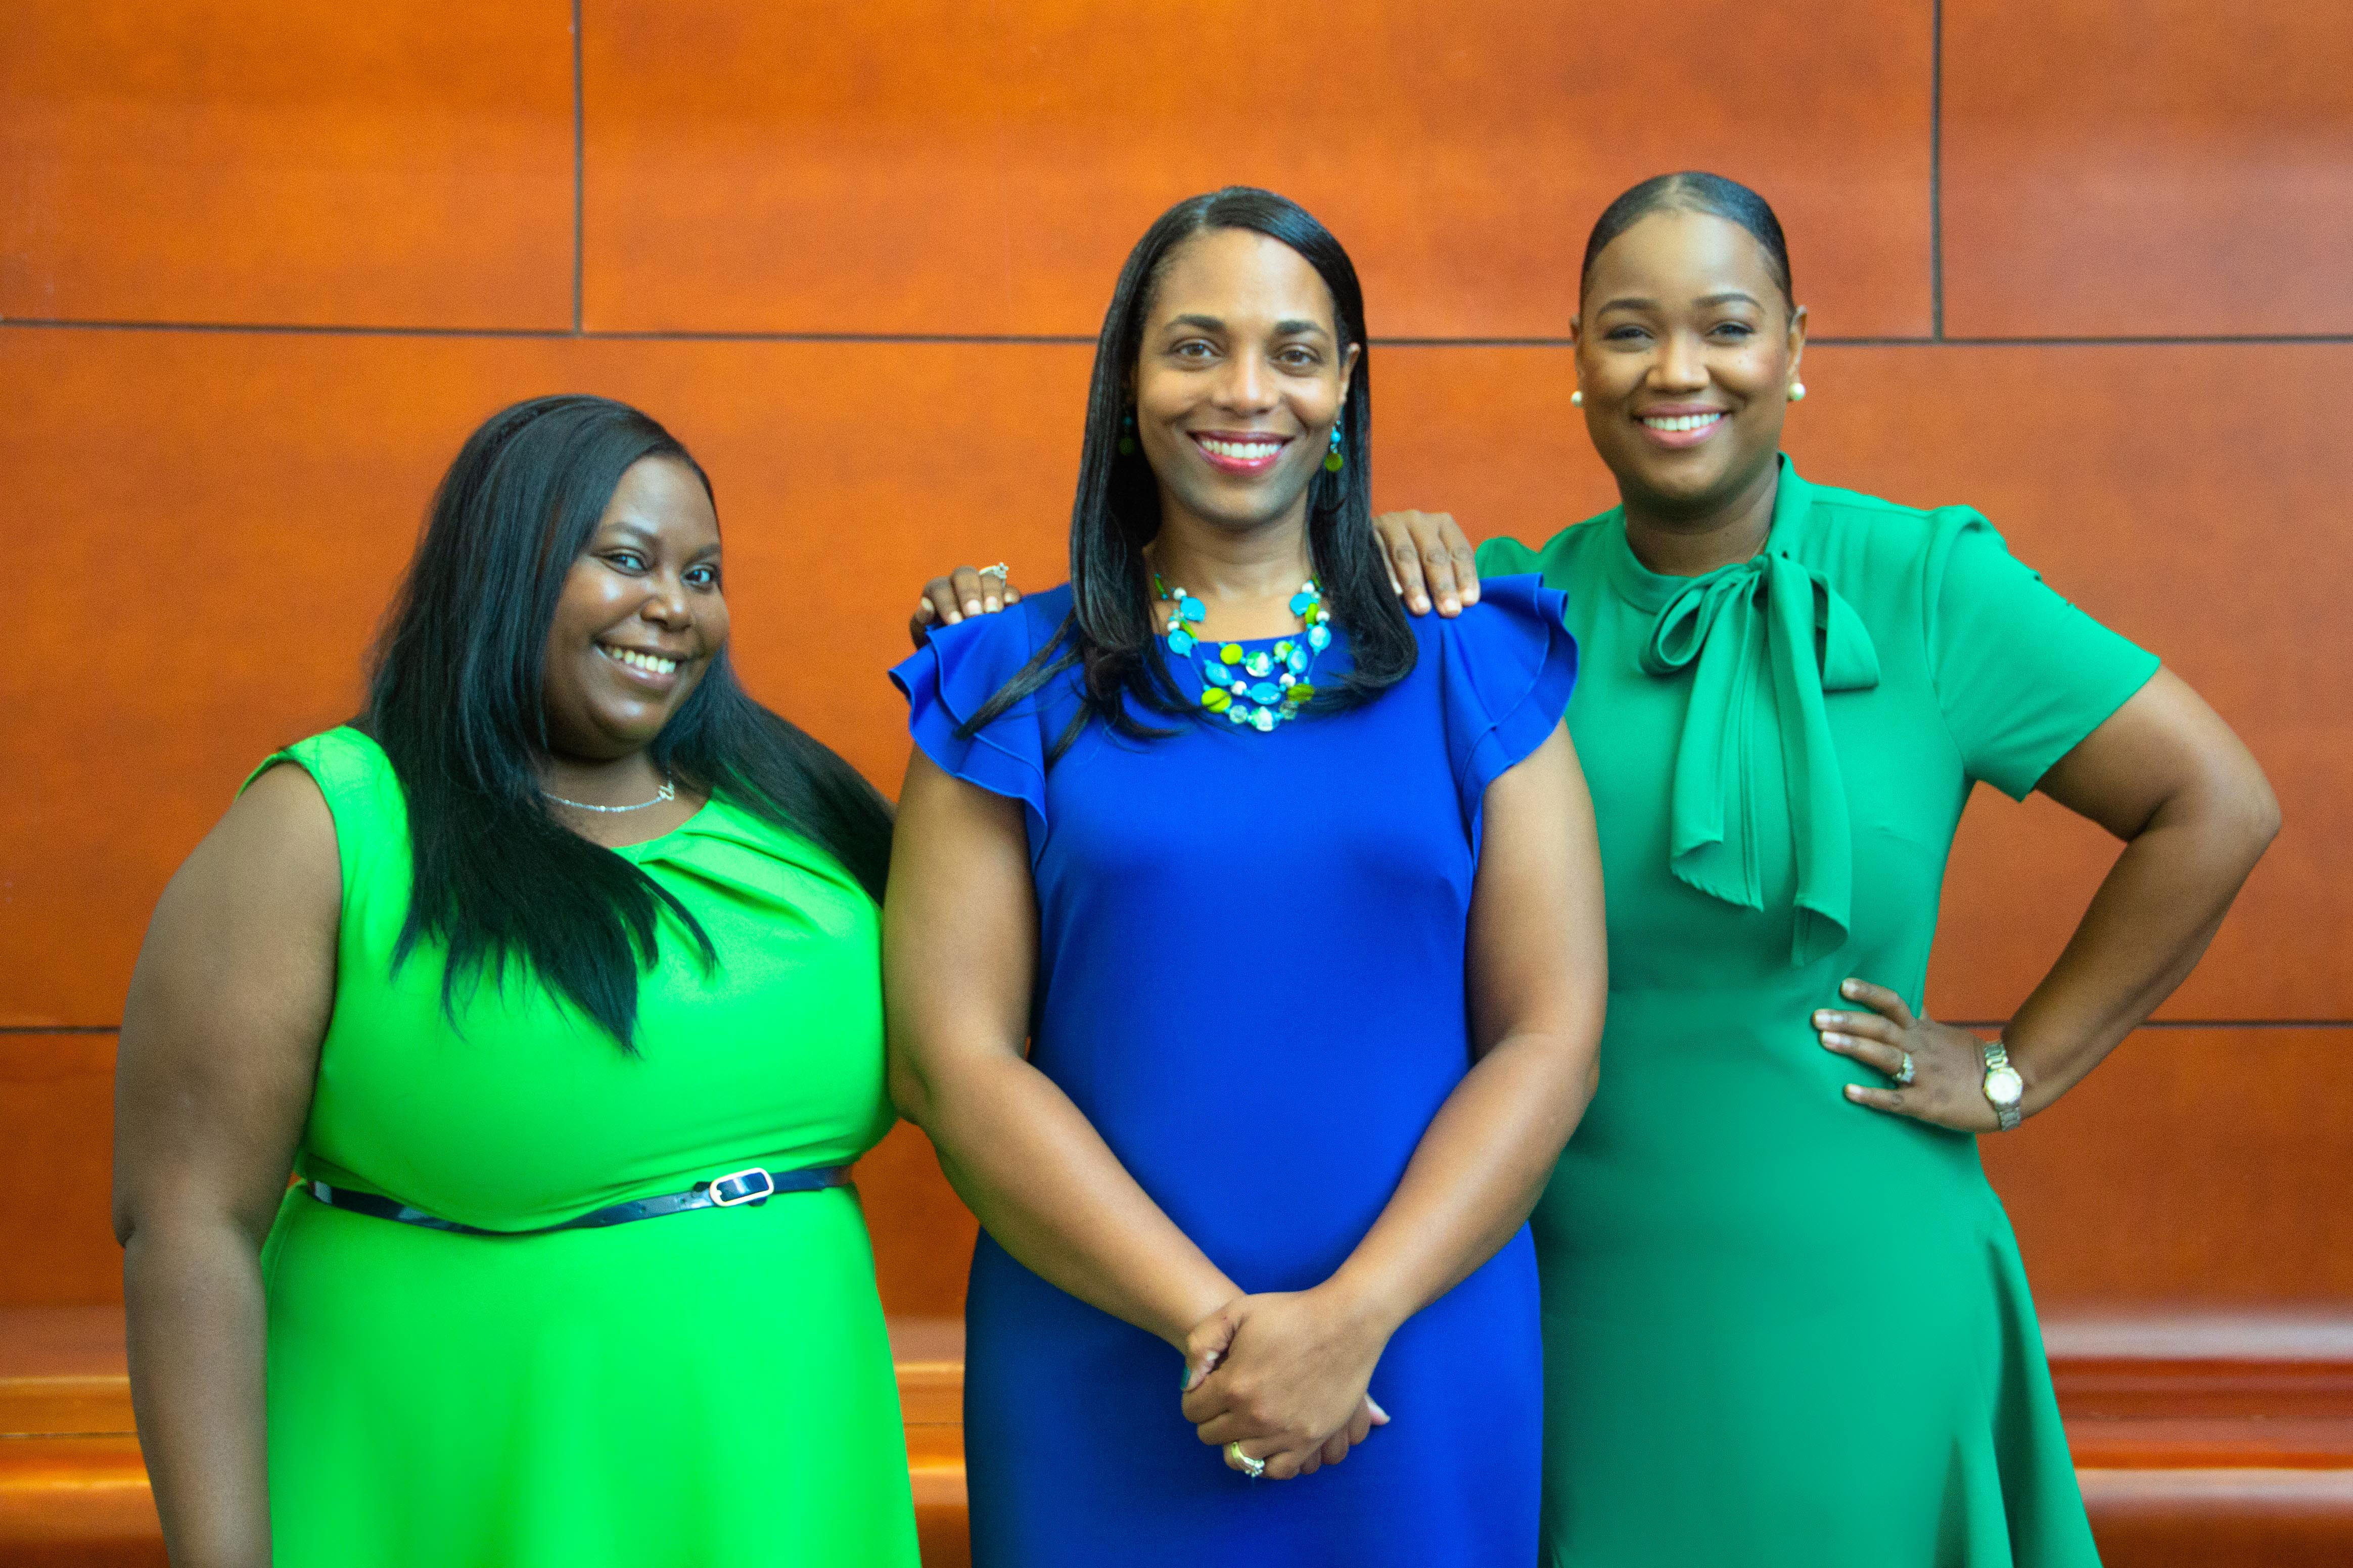 PHOTO: Photo consists of three women who are the staff of UHCL’s Office of Student Advocacy. The staff consists of the following (from left to right): Ebony Brunn, who is in a bright green dress, Kristi Randolph Simon, who is in a blue dress and LaToya Mills, who is in a darker green dress. All three are smiling with a brown wall behind them. Photo Courtesy of Ebony Brunn.